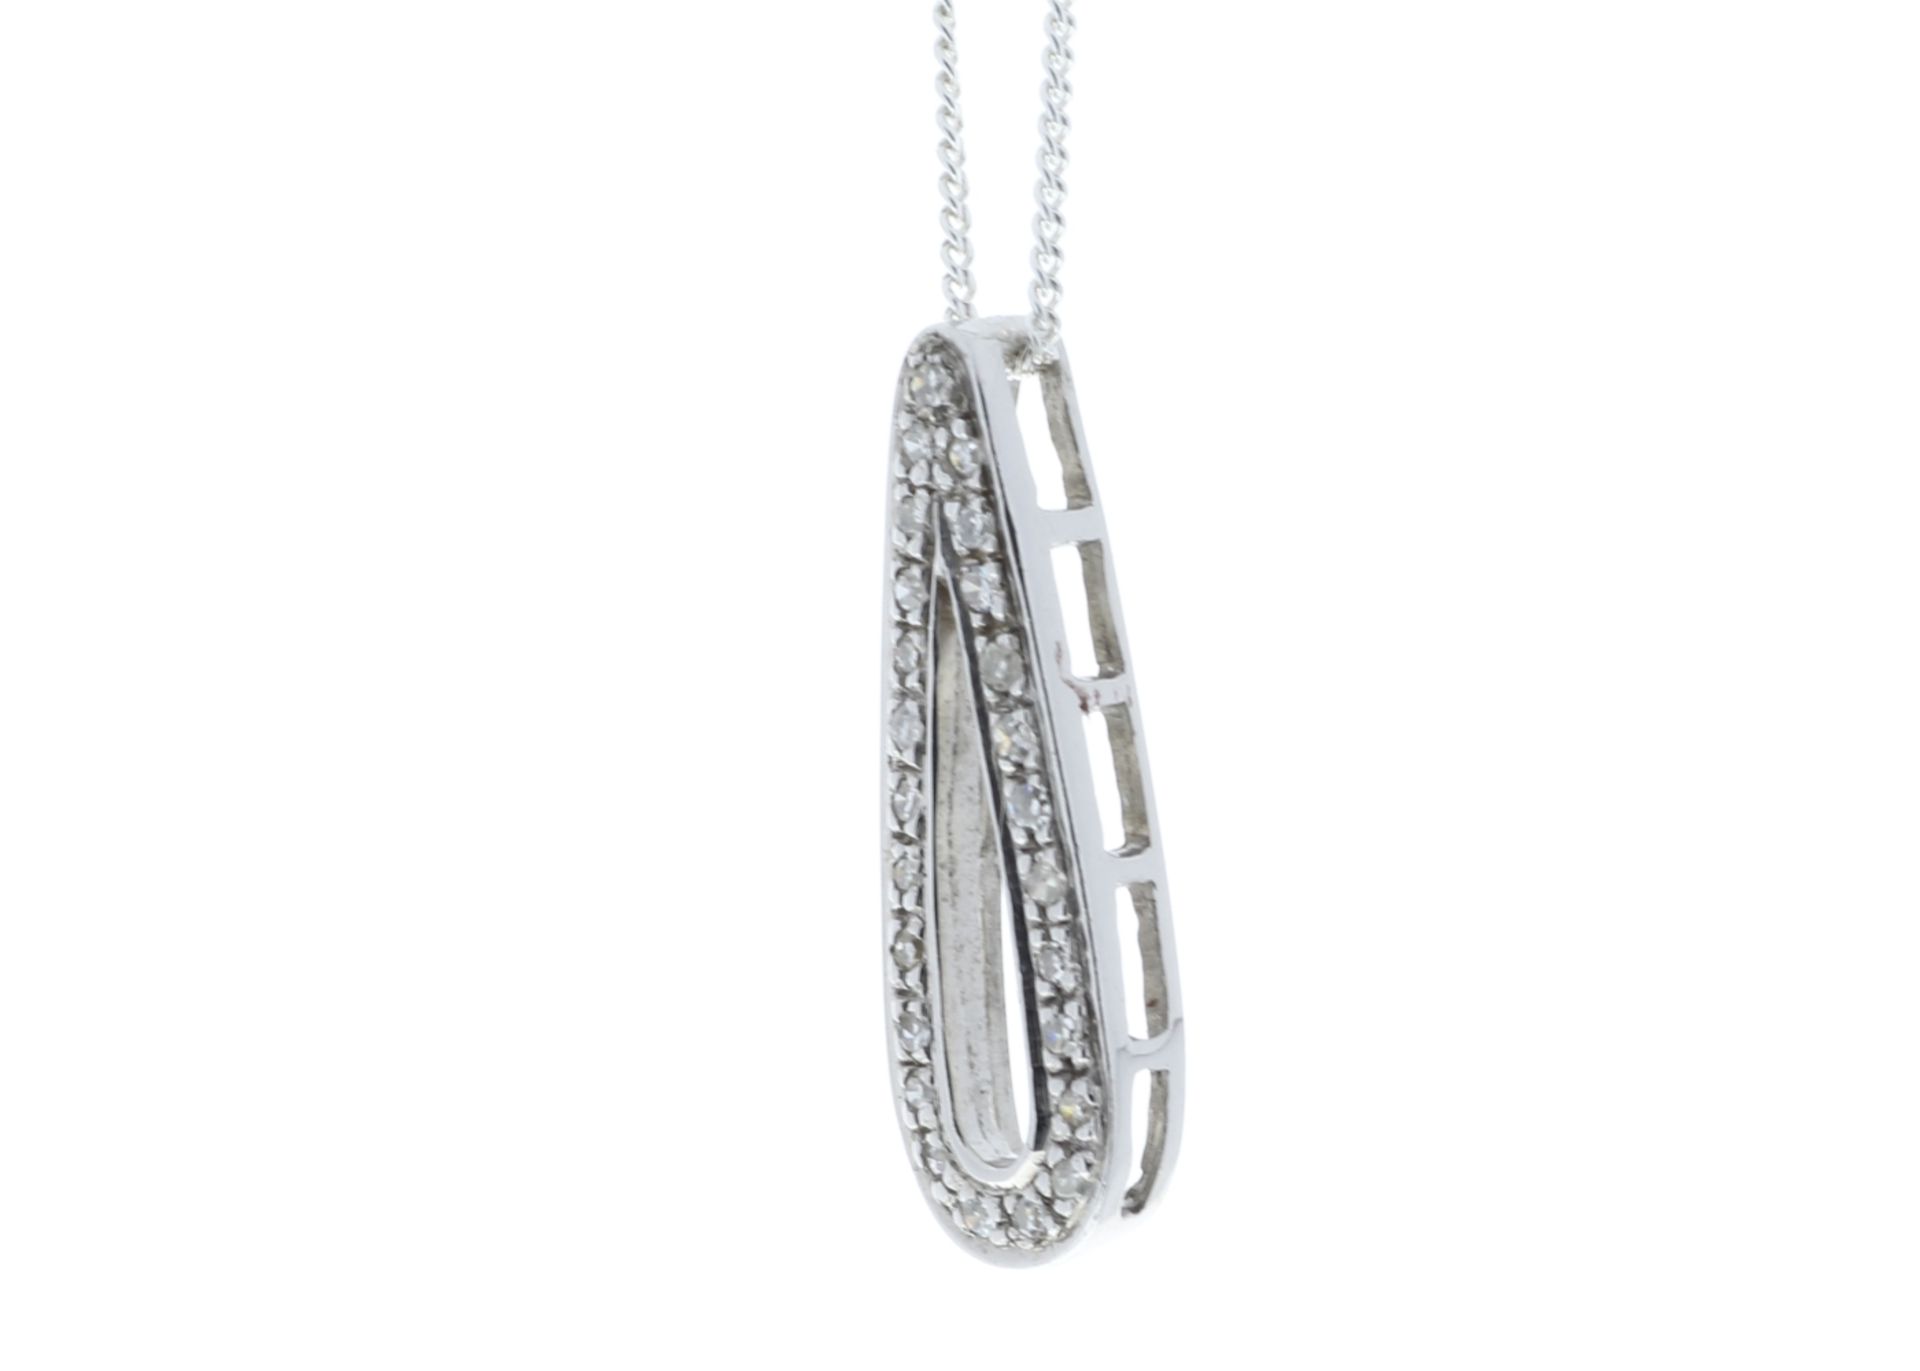 9ct White Gold Fancy Cluster Teardrop Shape Diamond Pendant 0.12 Carats - Valued by GIE £1,820. - Image 4 of 5